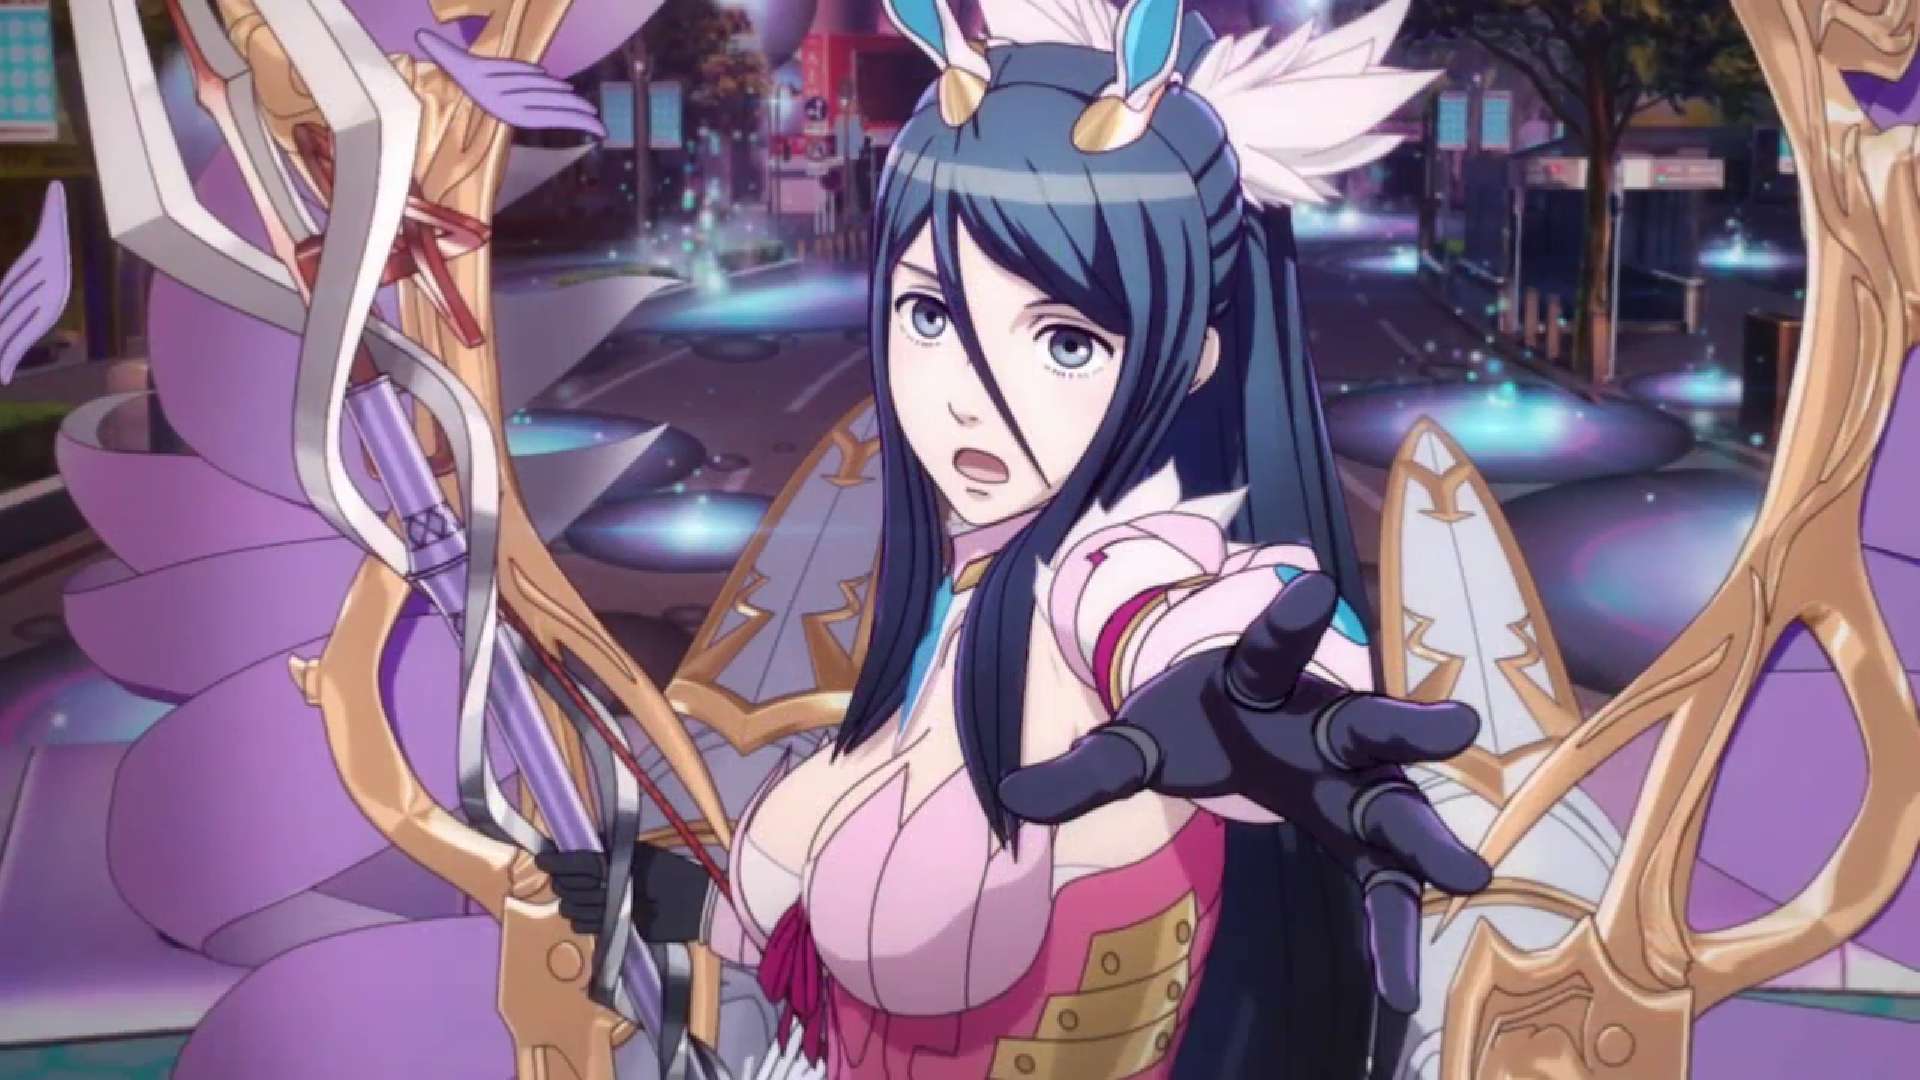 Fire Emblem-SMT Crossover Game Has Japanese Release Date